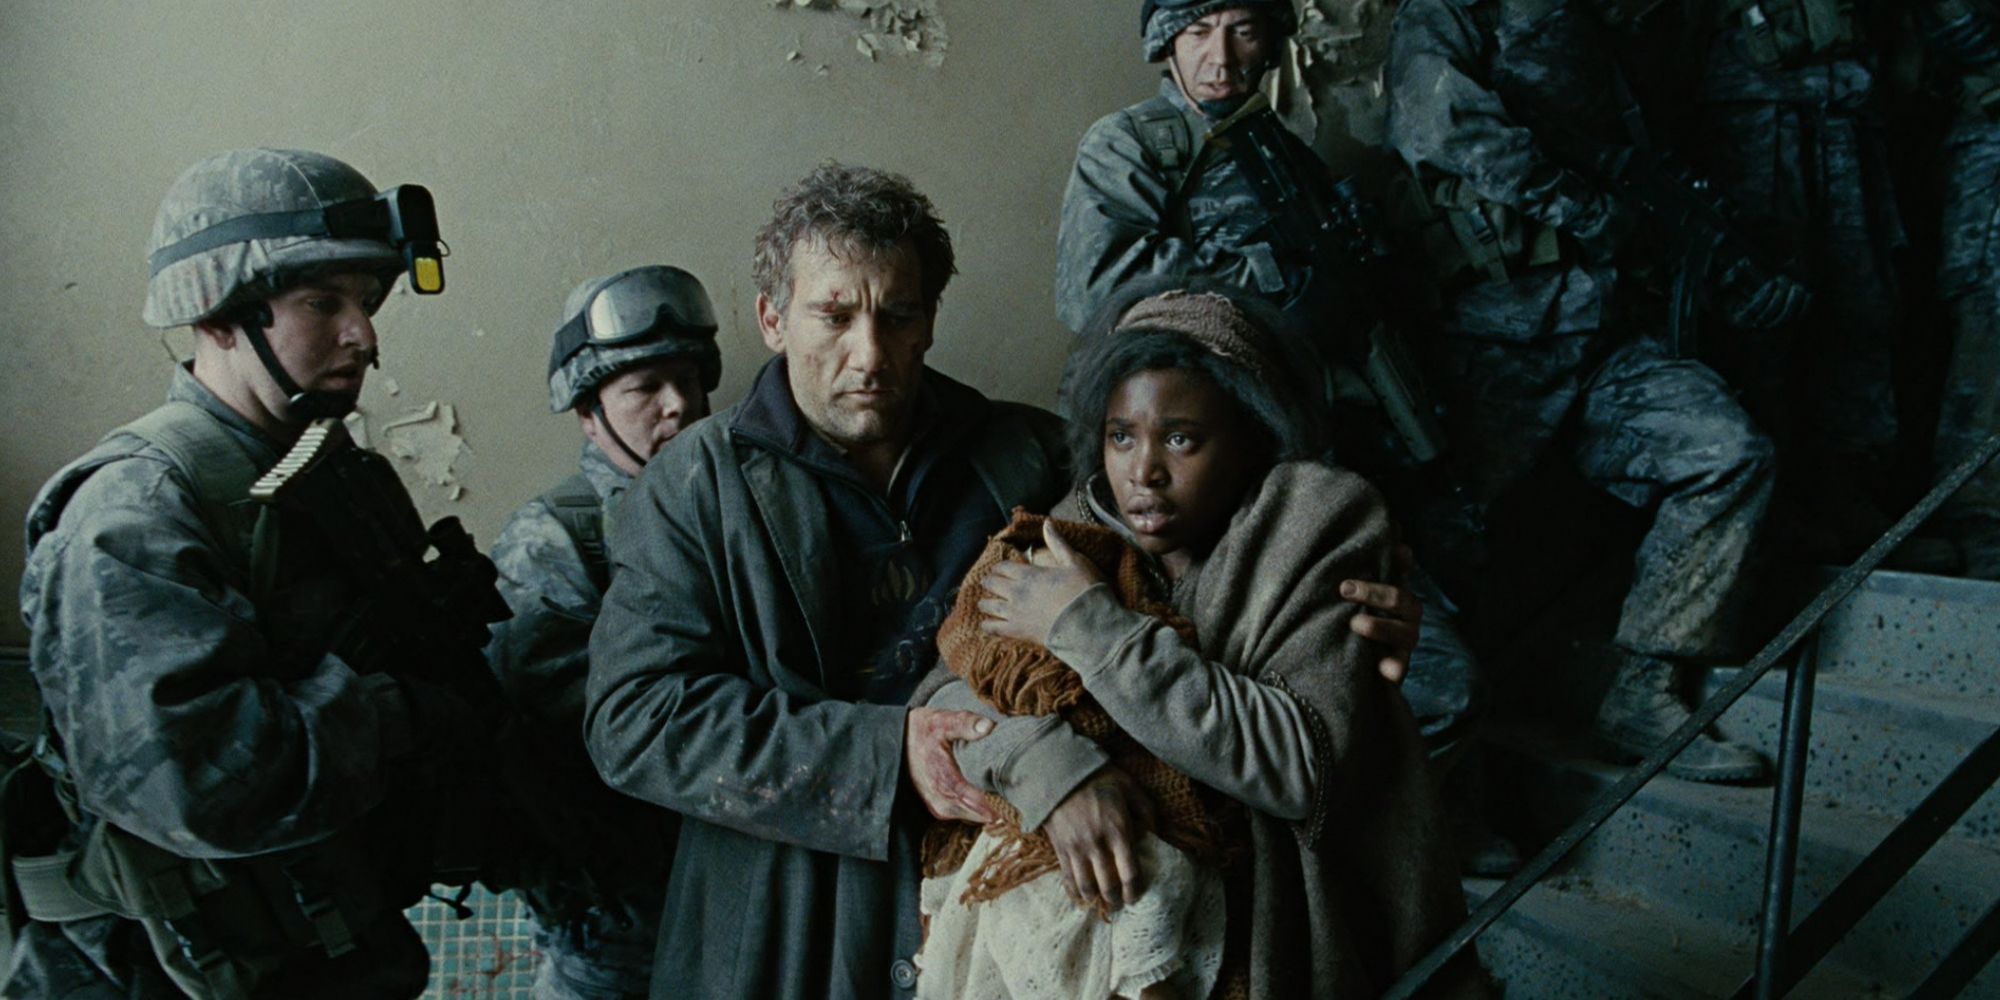 Theo (Clive Owen) and Kee (Clare-Hope Ashitey) walking past soldiers with a baby in 'Children of Men' (2006)